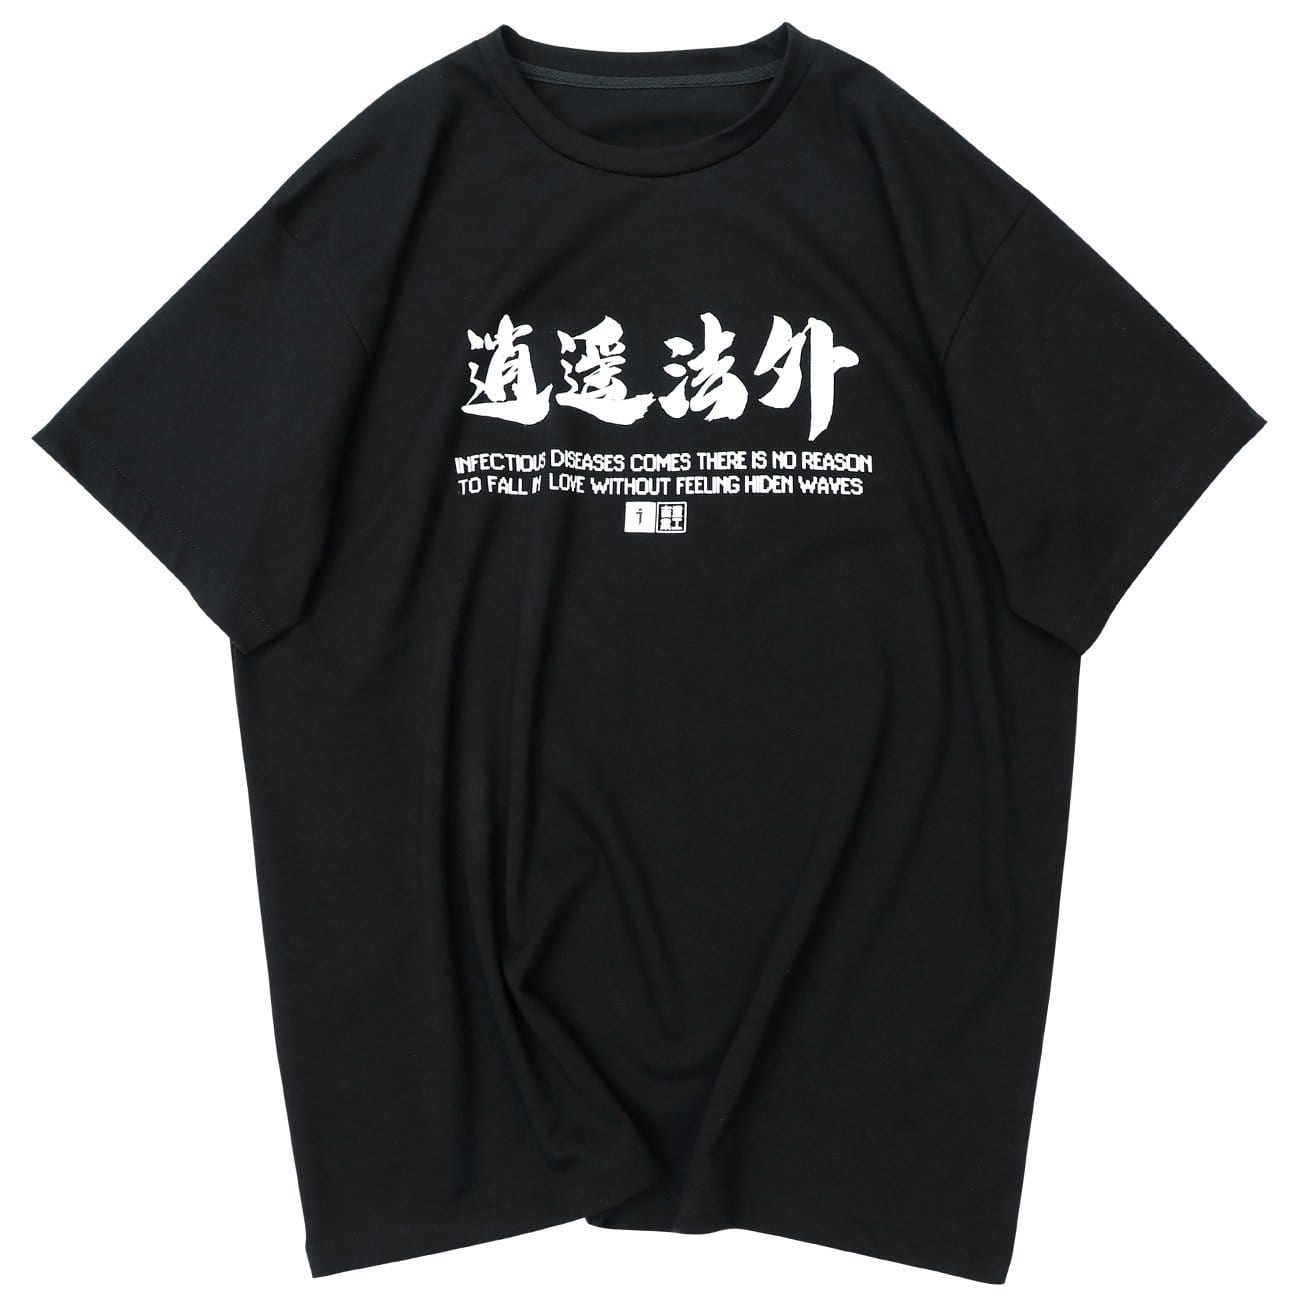 Free and Unfettered Exorbitant Letters T-Shirt